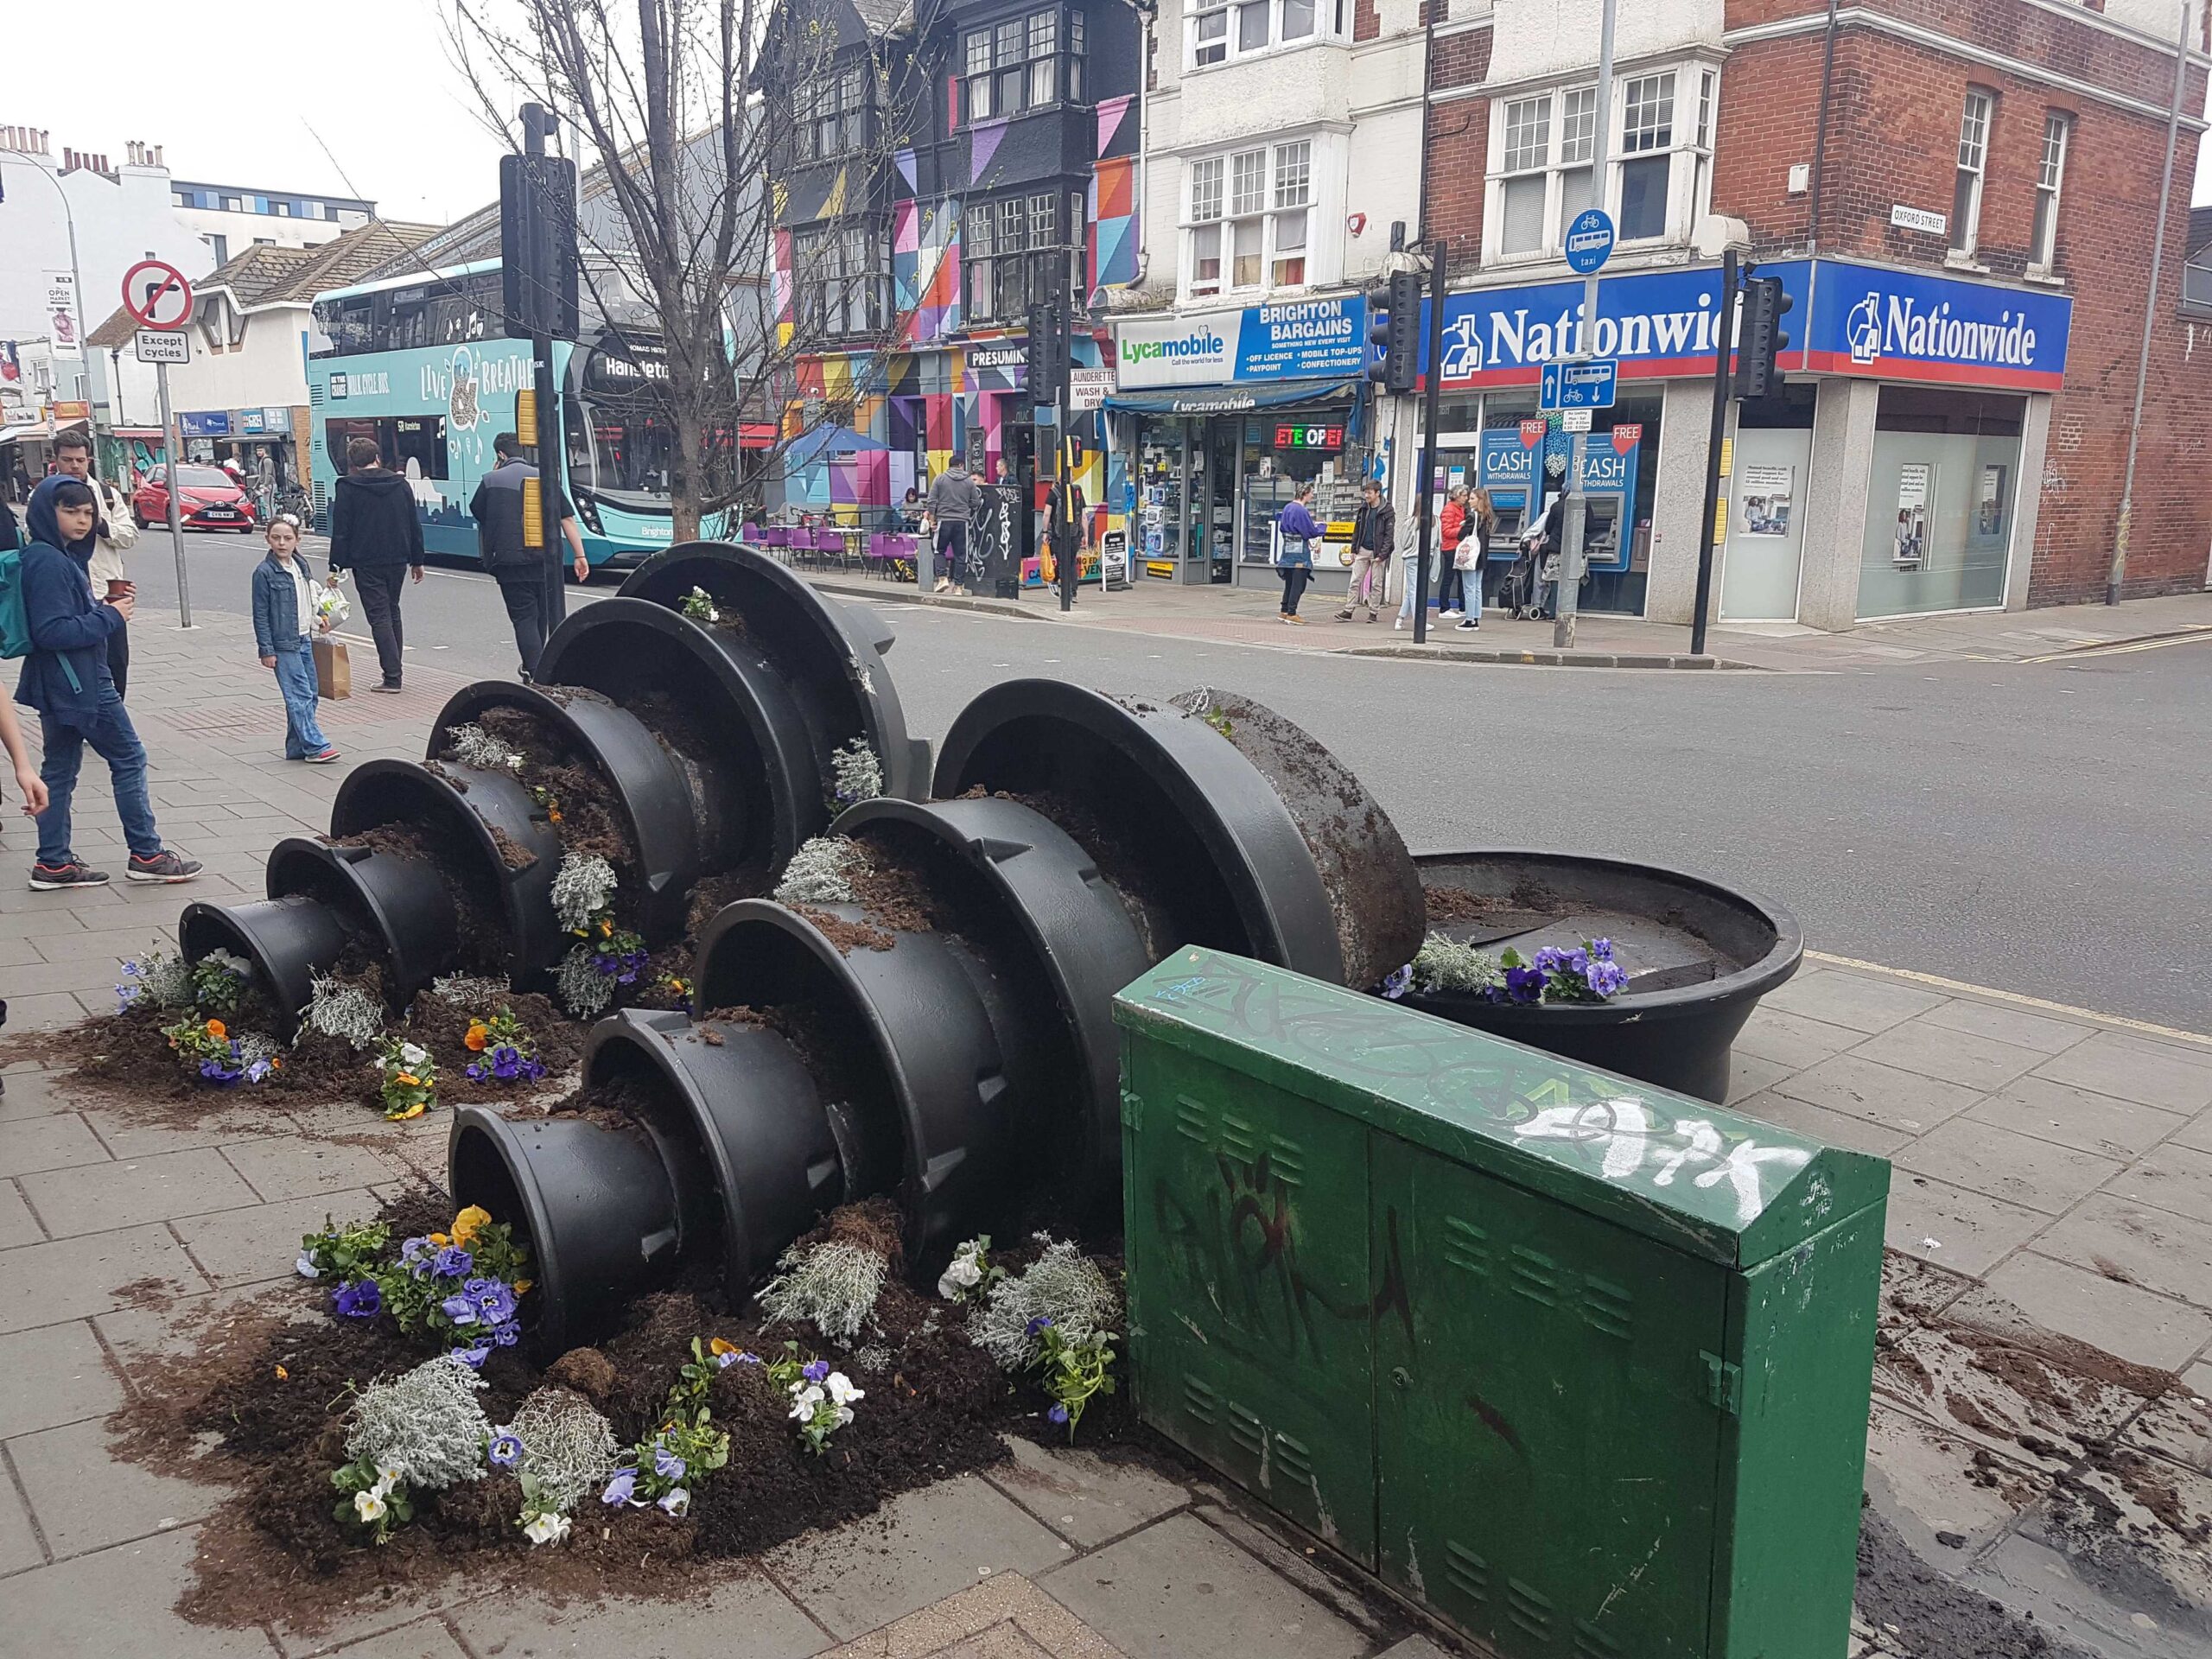 Brighton and Hove News » Giant flower planters toppled